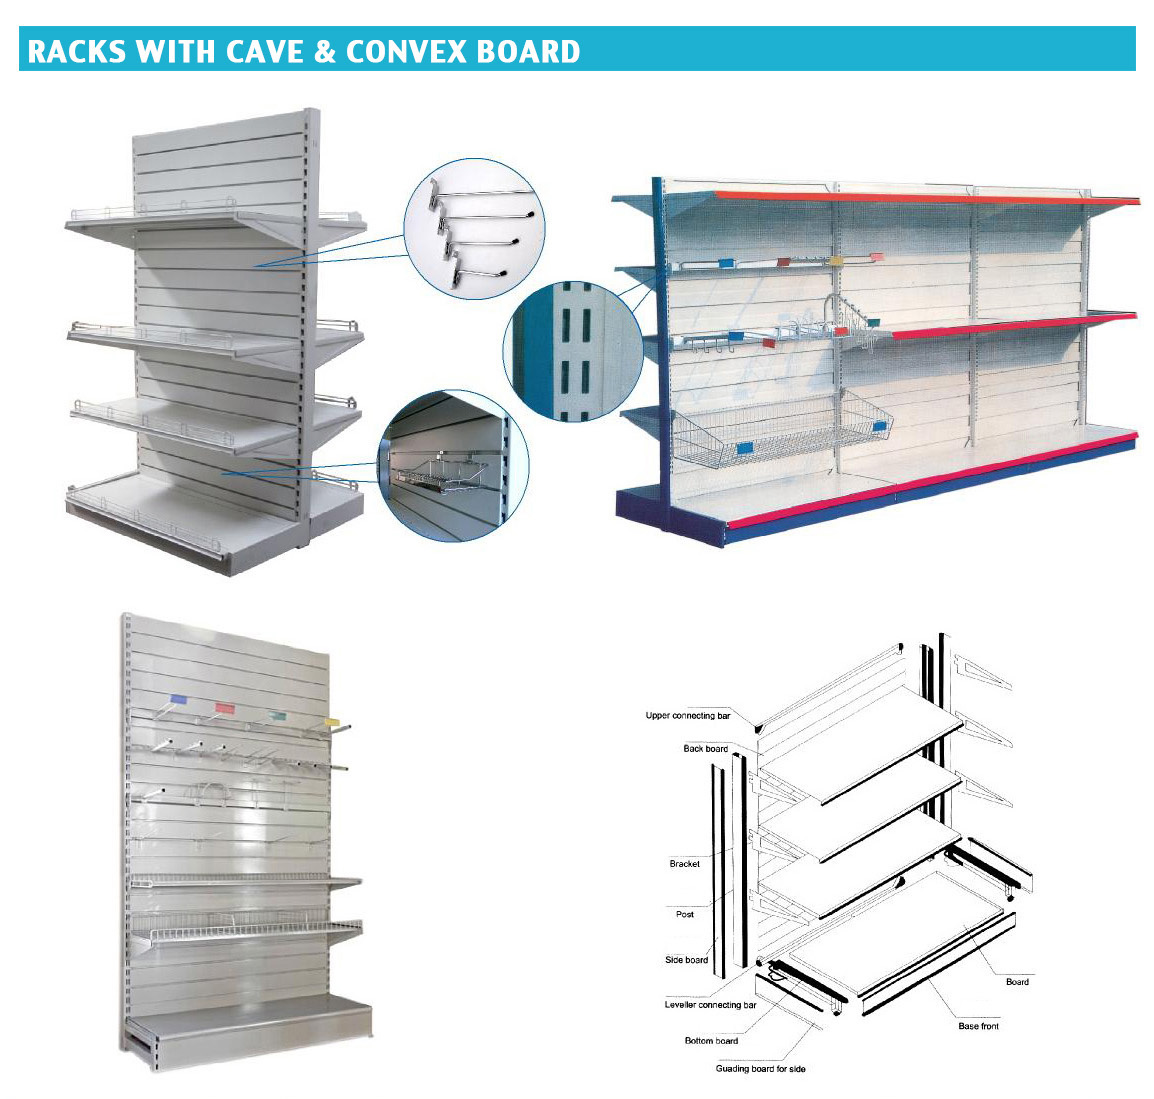 Rack with Cave & Convex Board